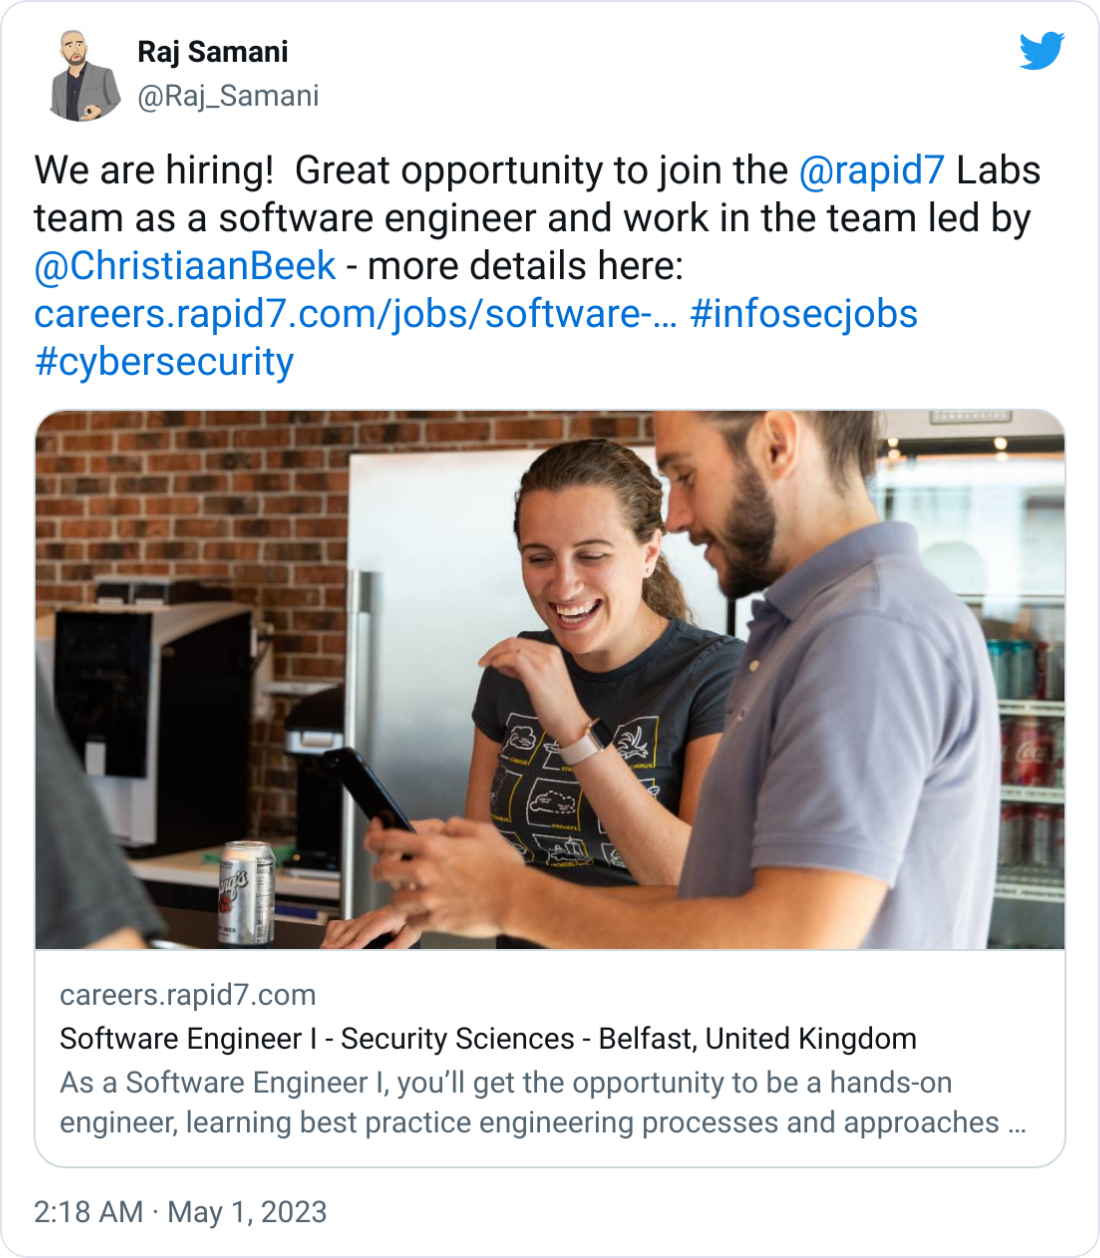 Raj Samani @Raj_Samani We are hiring!  Great opportunity to join the  @rapid7  Labs team as a software engineer and work in the team led by  @ChristiaanBeek  - more details here: https://careers.rapid7.com/jobs/software-engineer-i-security-sciences-belfast-united-kingdom #infosecjobs #cybersecurity